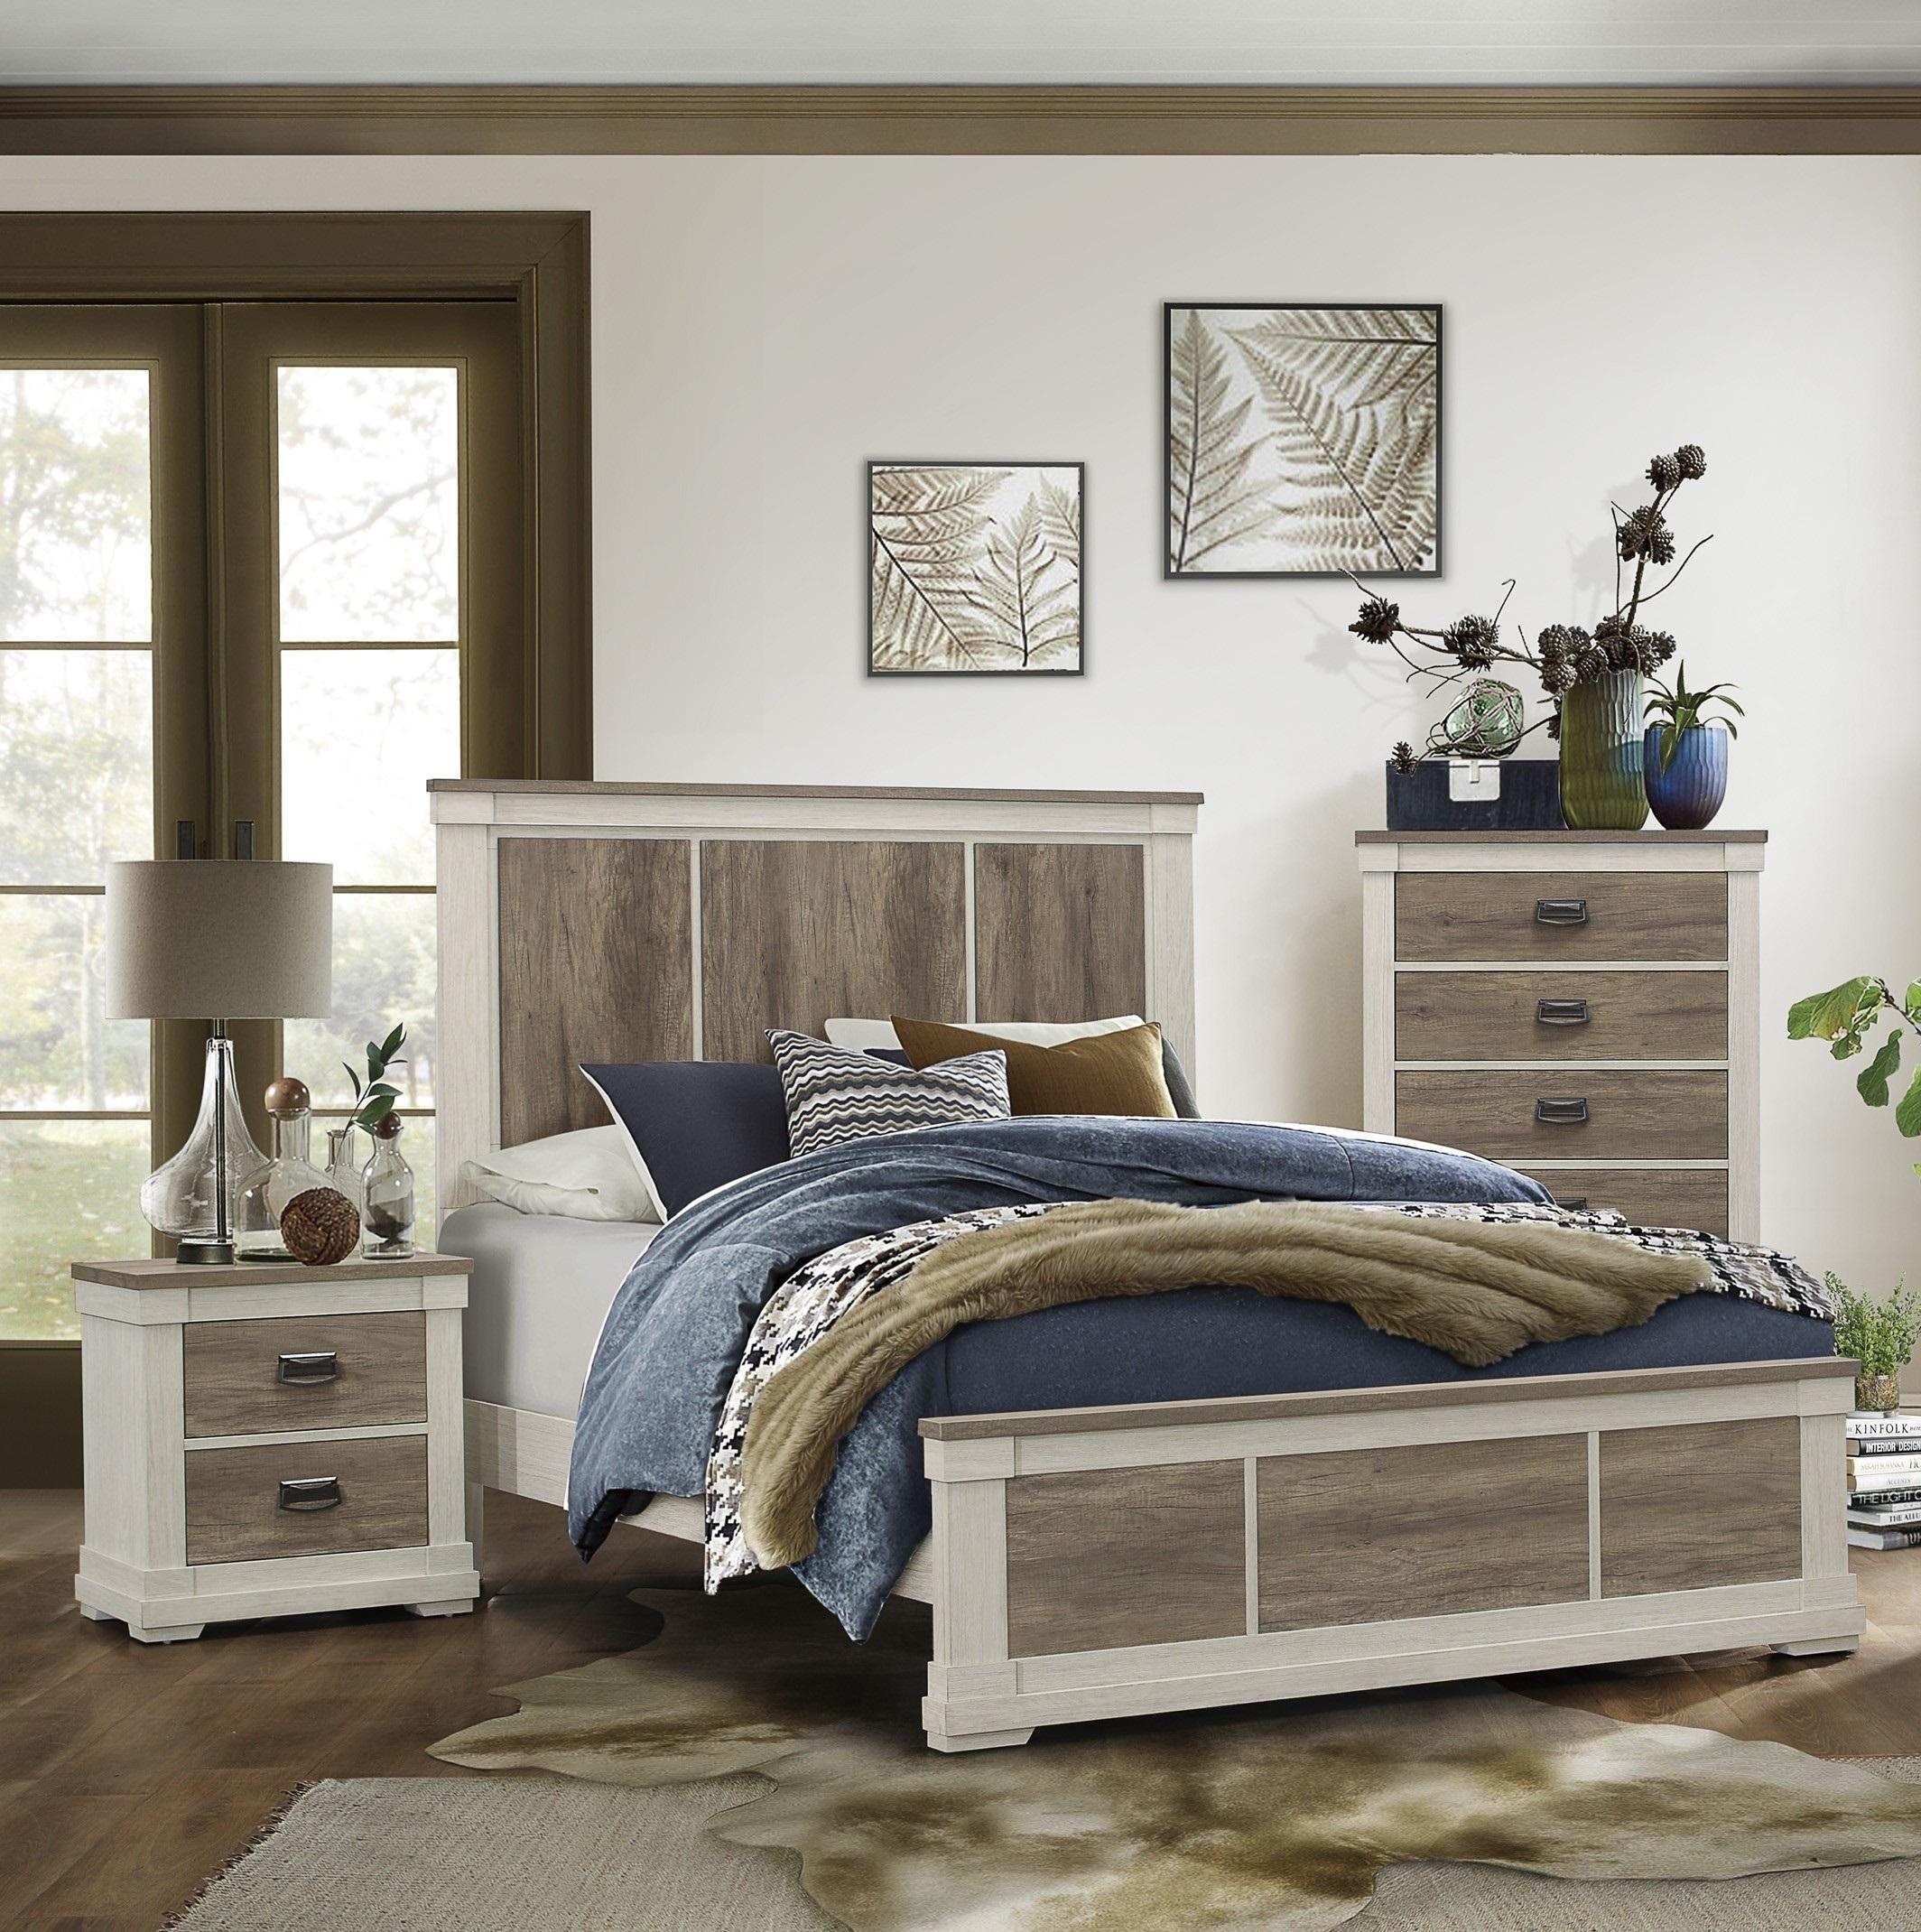 

    
Transitional White & Weathered Gray Wood Queen Bedroom Set 3pcs Homelegance 1677-1* Arcadia
